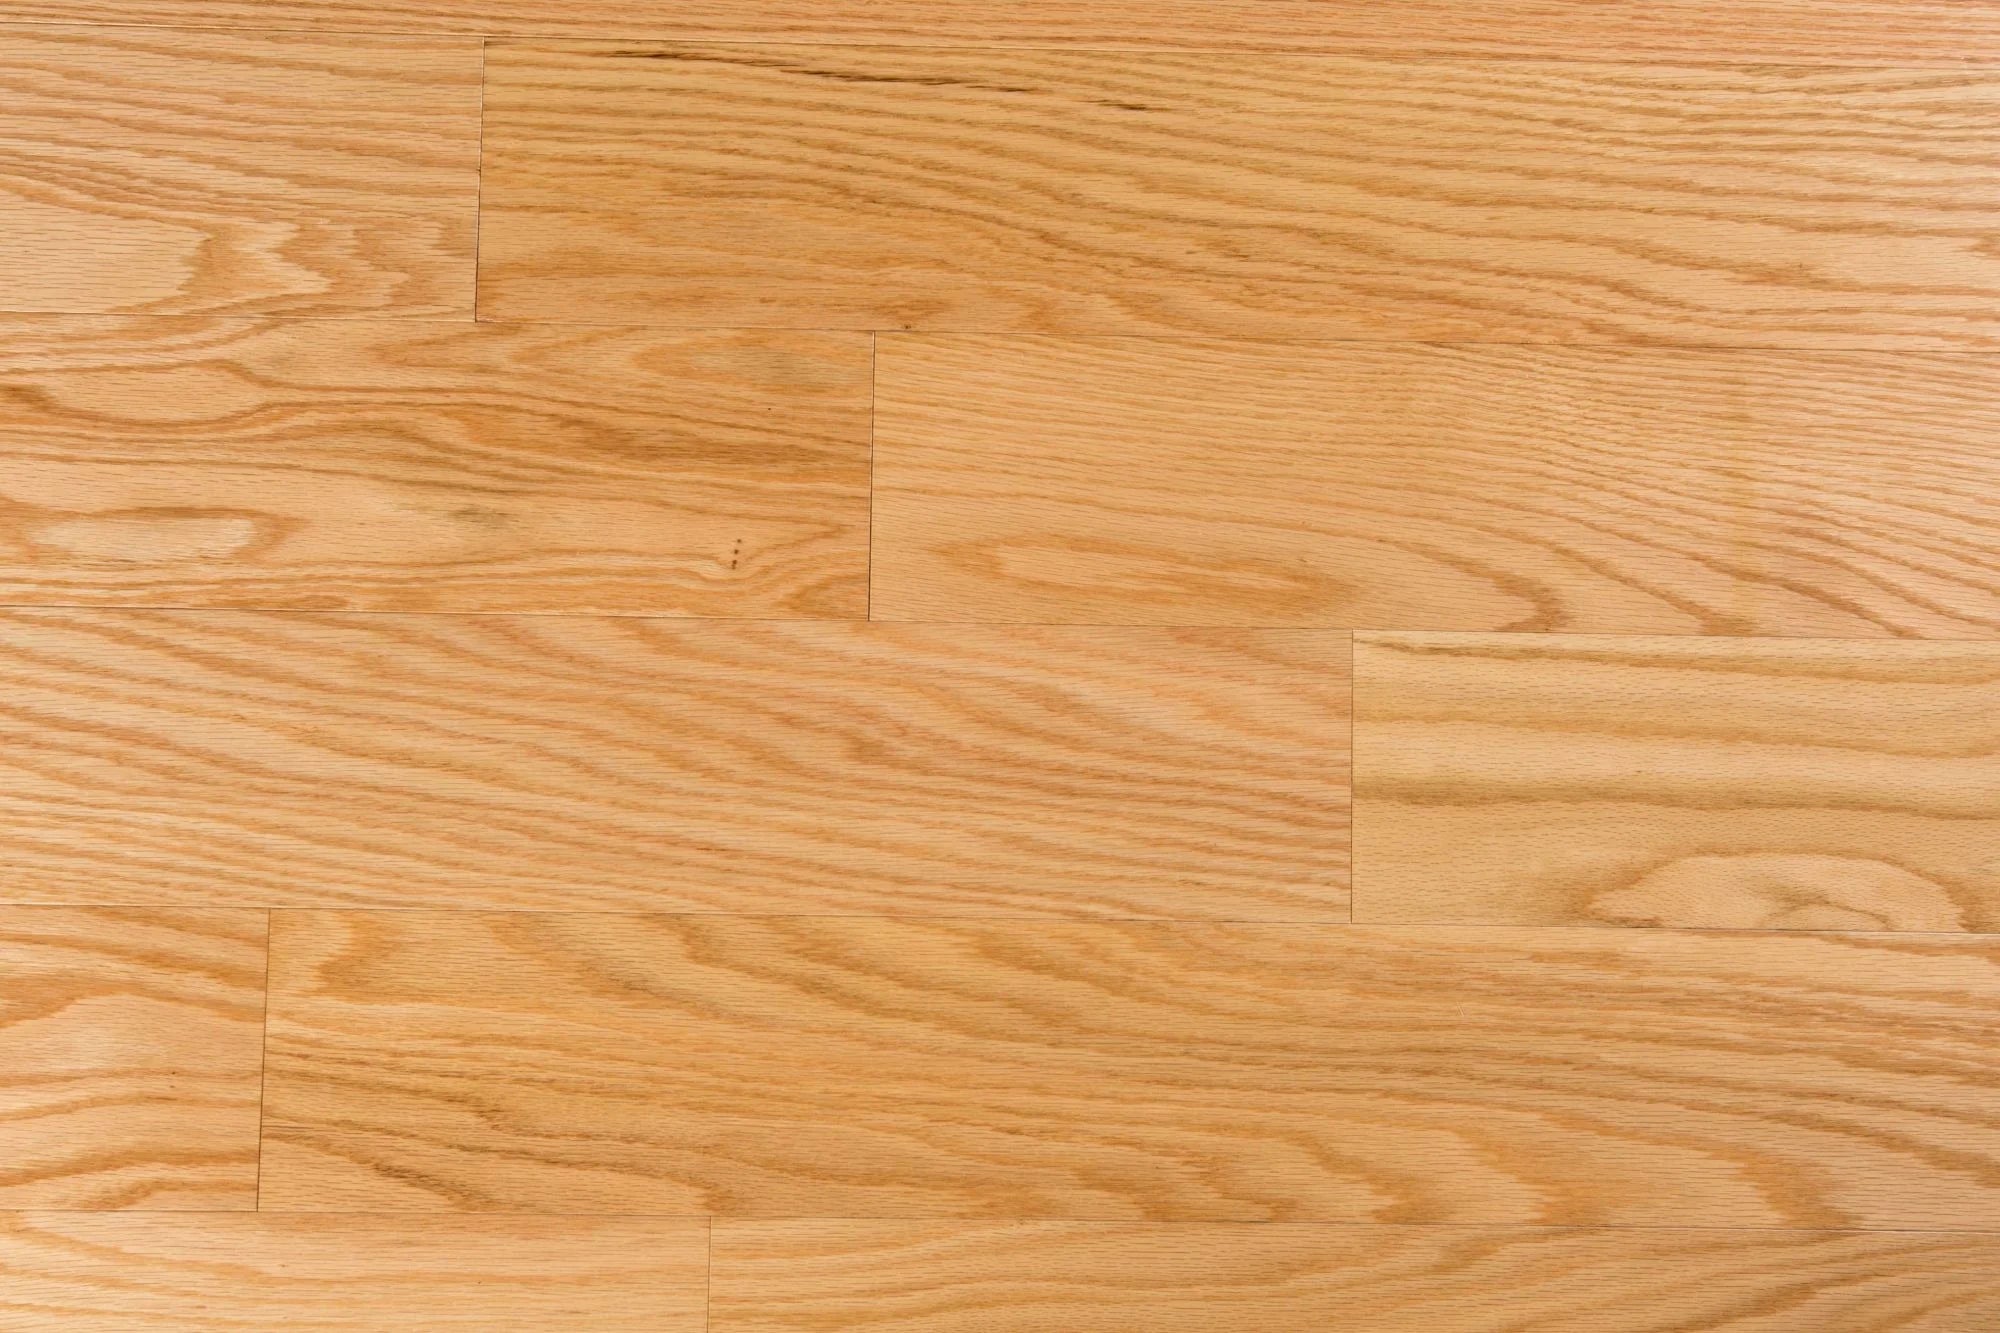 Red Oak Natural - Smooth 5/8" x 3" or 1/2" x 5" - Engineered Hardwood